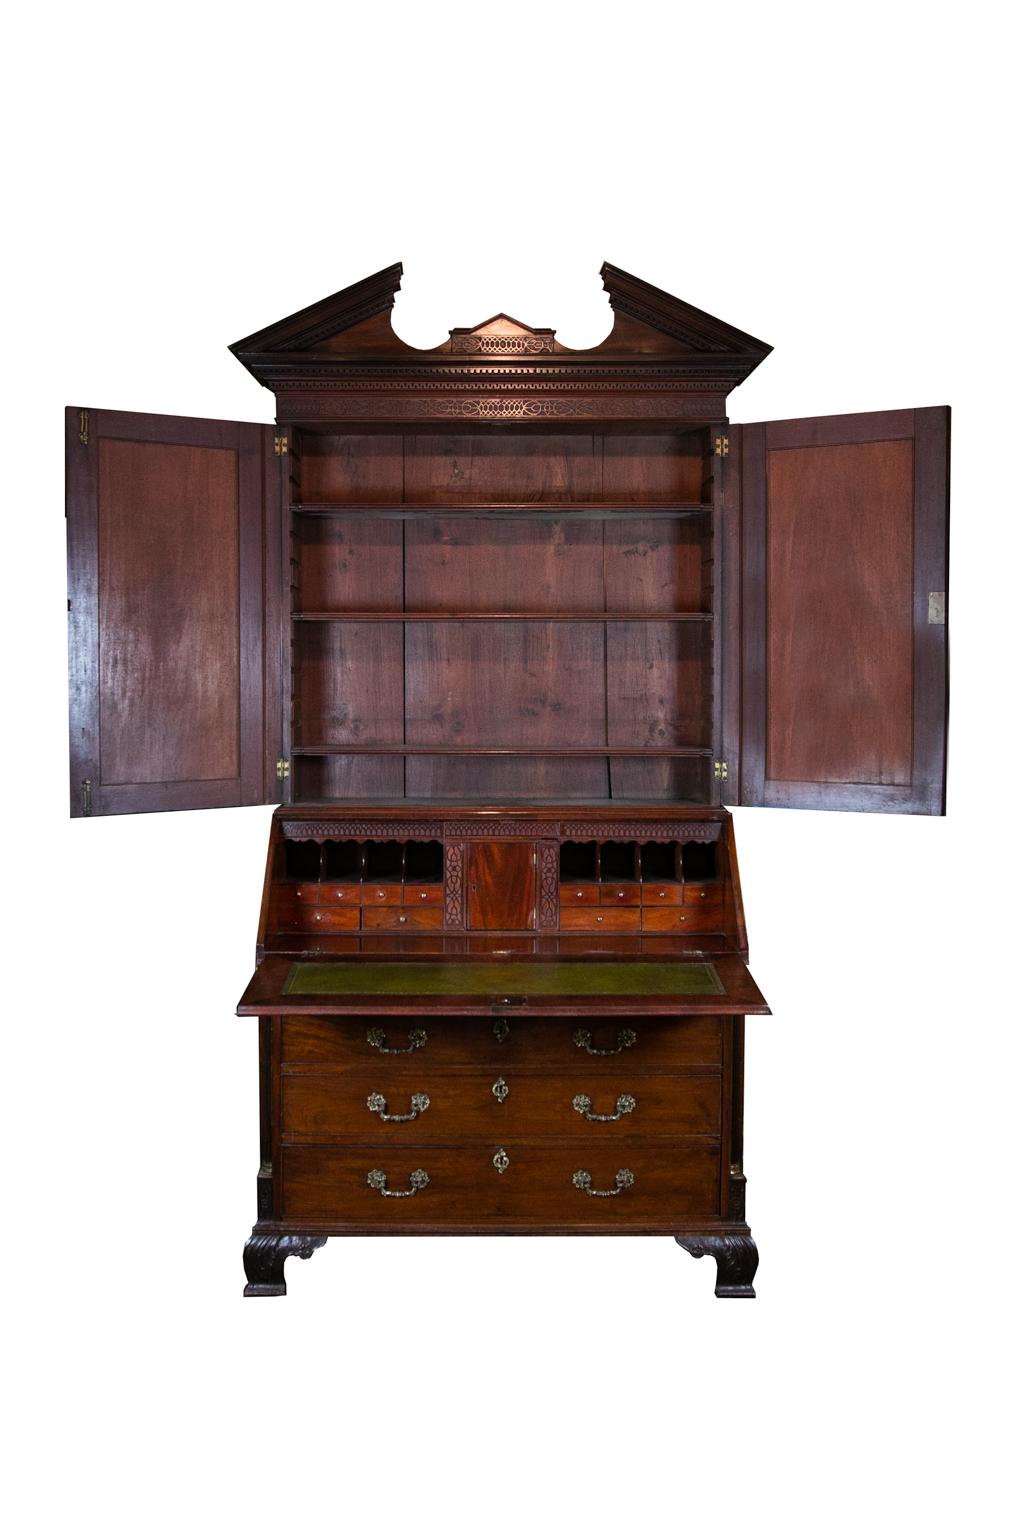 18th century English mahogany Secretary, with the frieze having blind fretwork. The cornice has dental molding and wall of Troy molding. The doors have stylized scallop shell quarter panels flanked by fluted quarter columns with high Corinthian